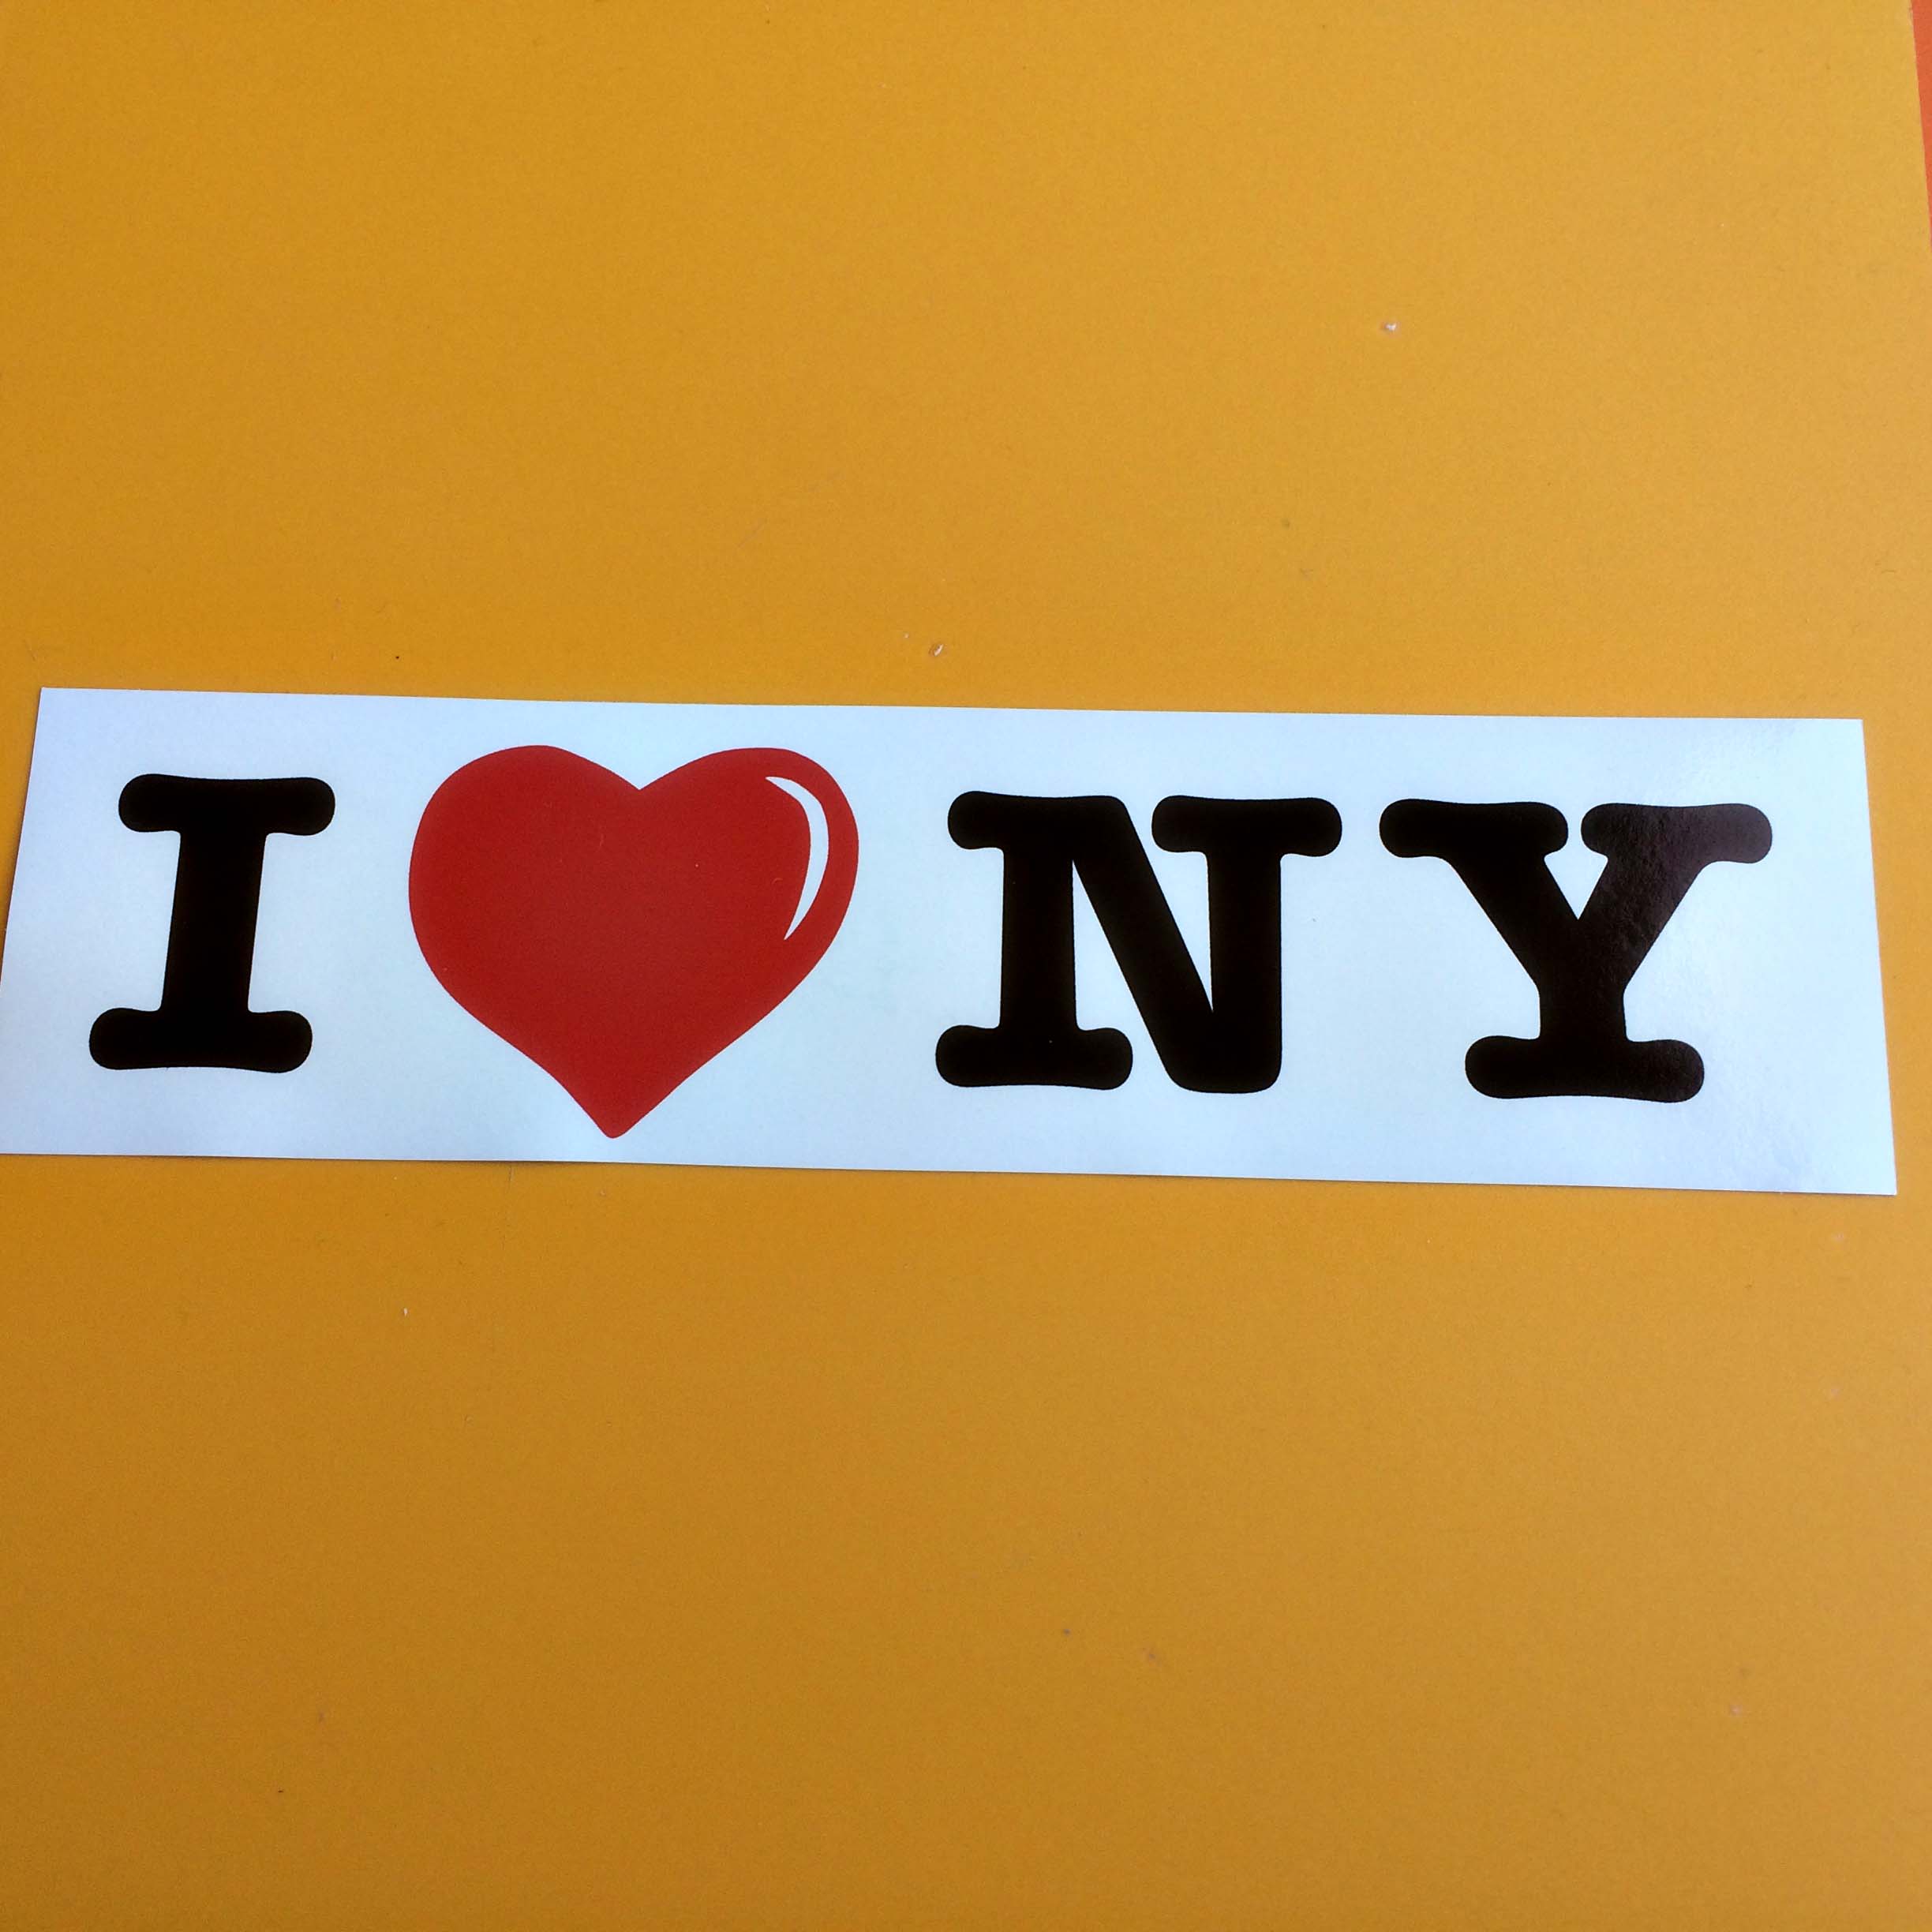 The letters I and NY in bold black lettering either side of a red love heart on a white background.